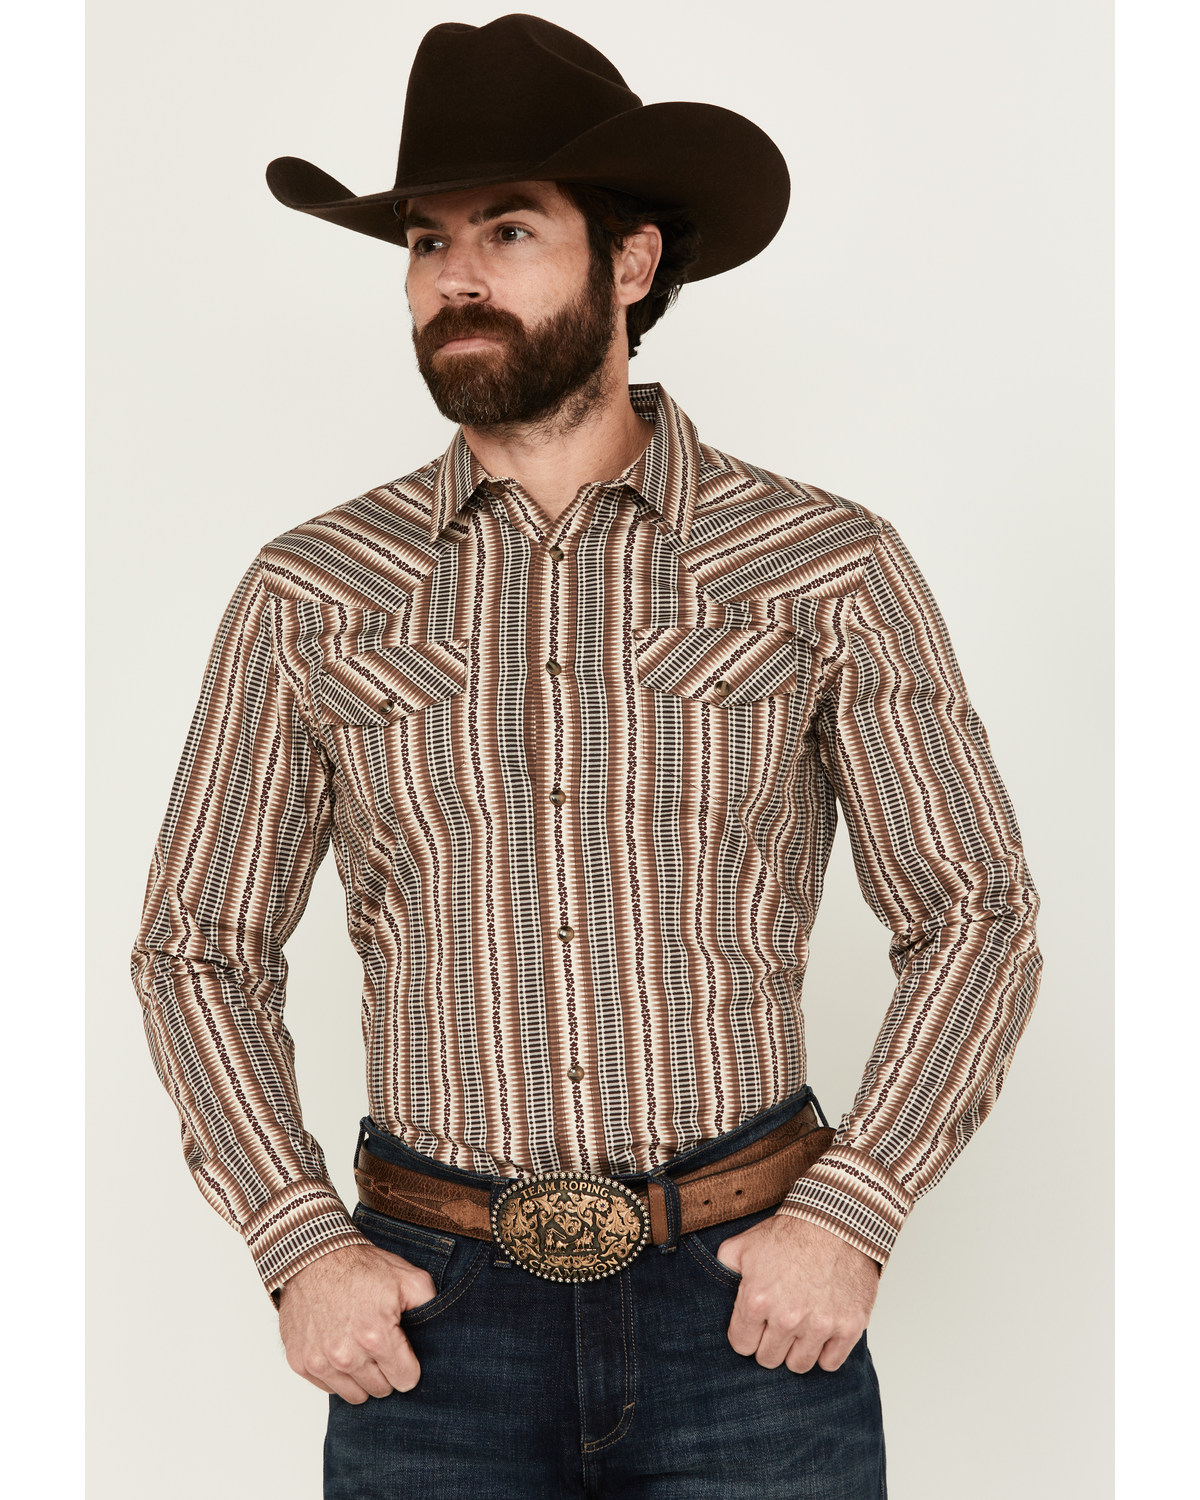 Gibson Men's Show Downer Floral Striped Long Sleeve Snap Western Shirt